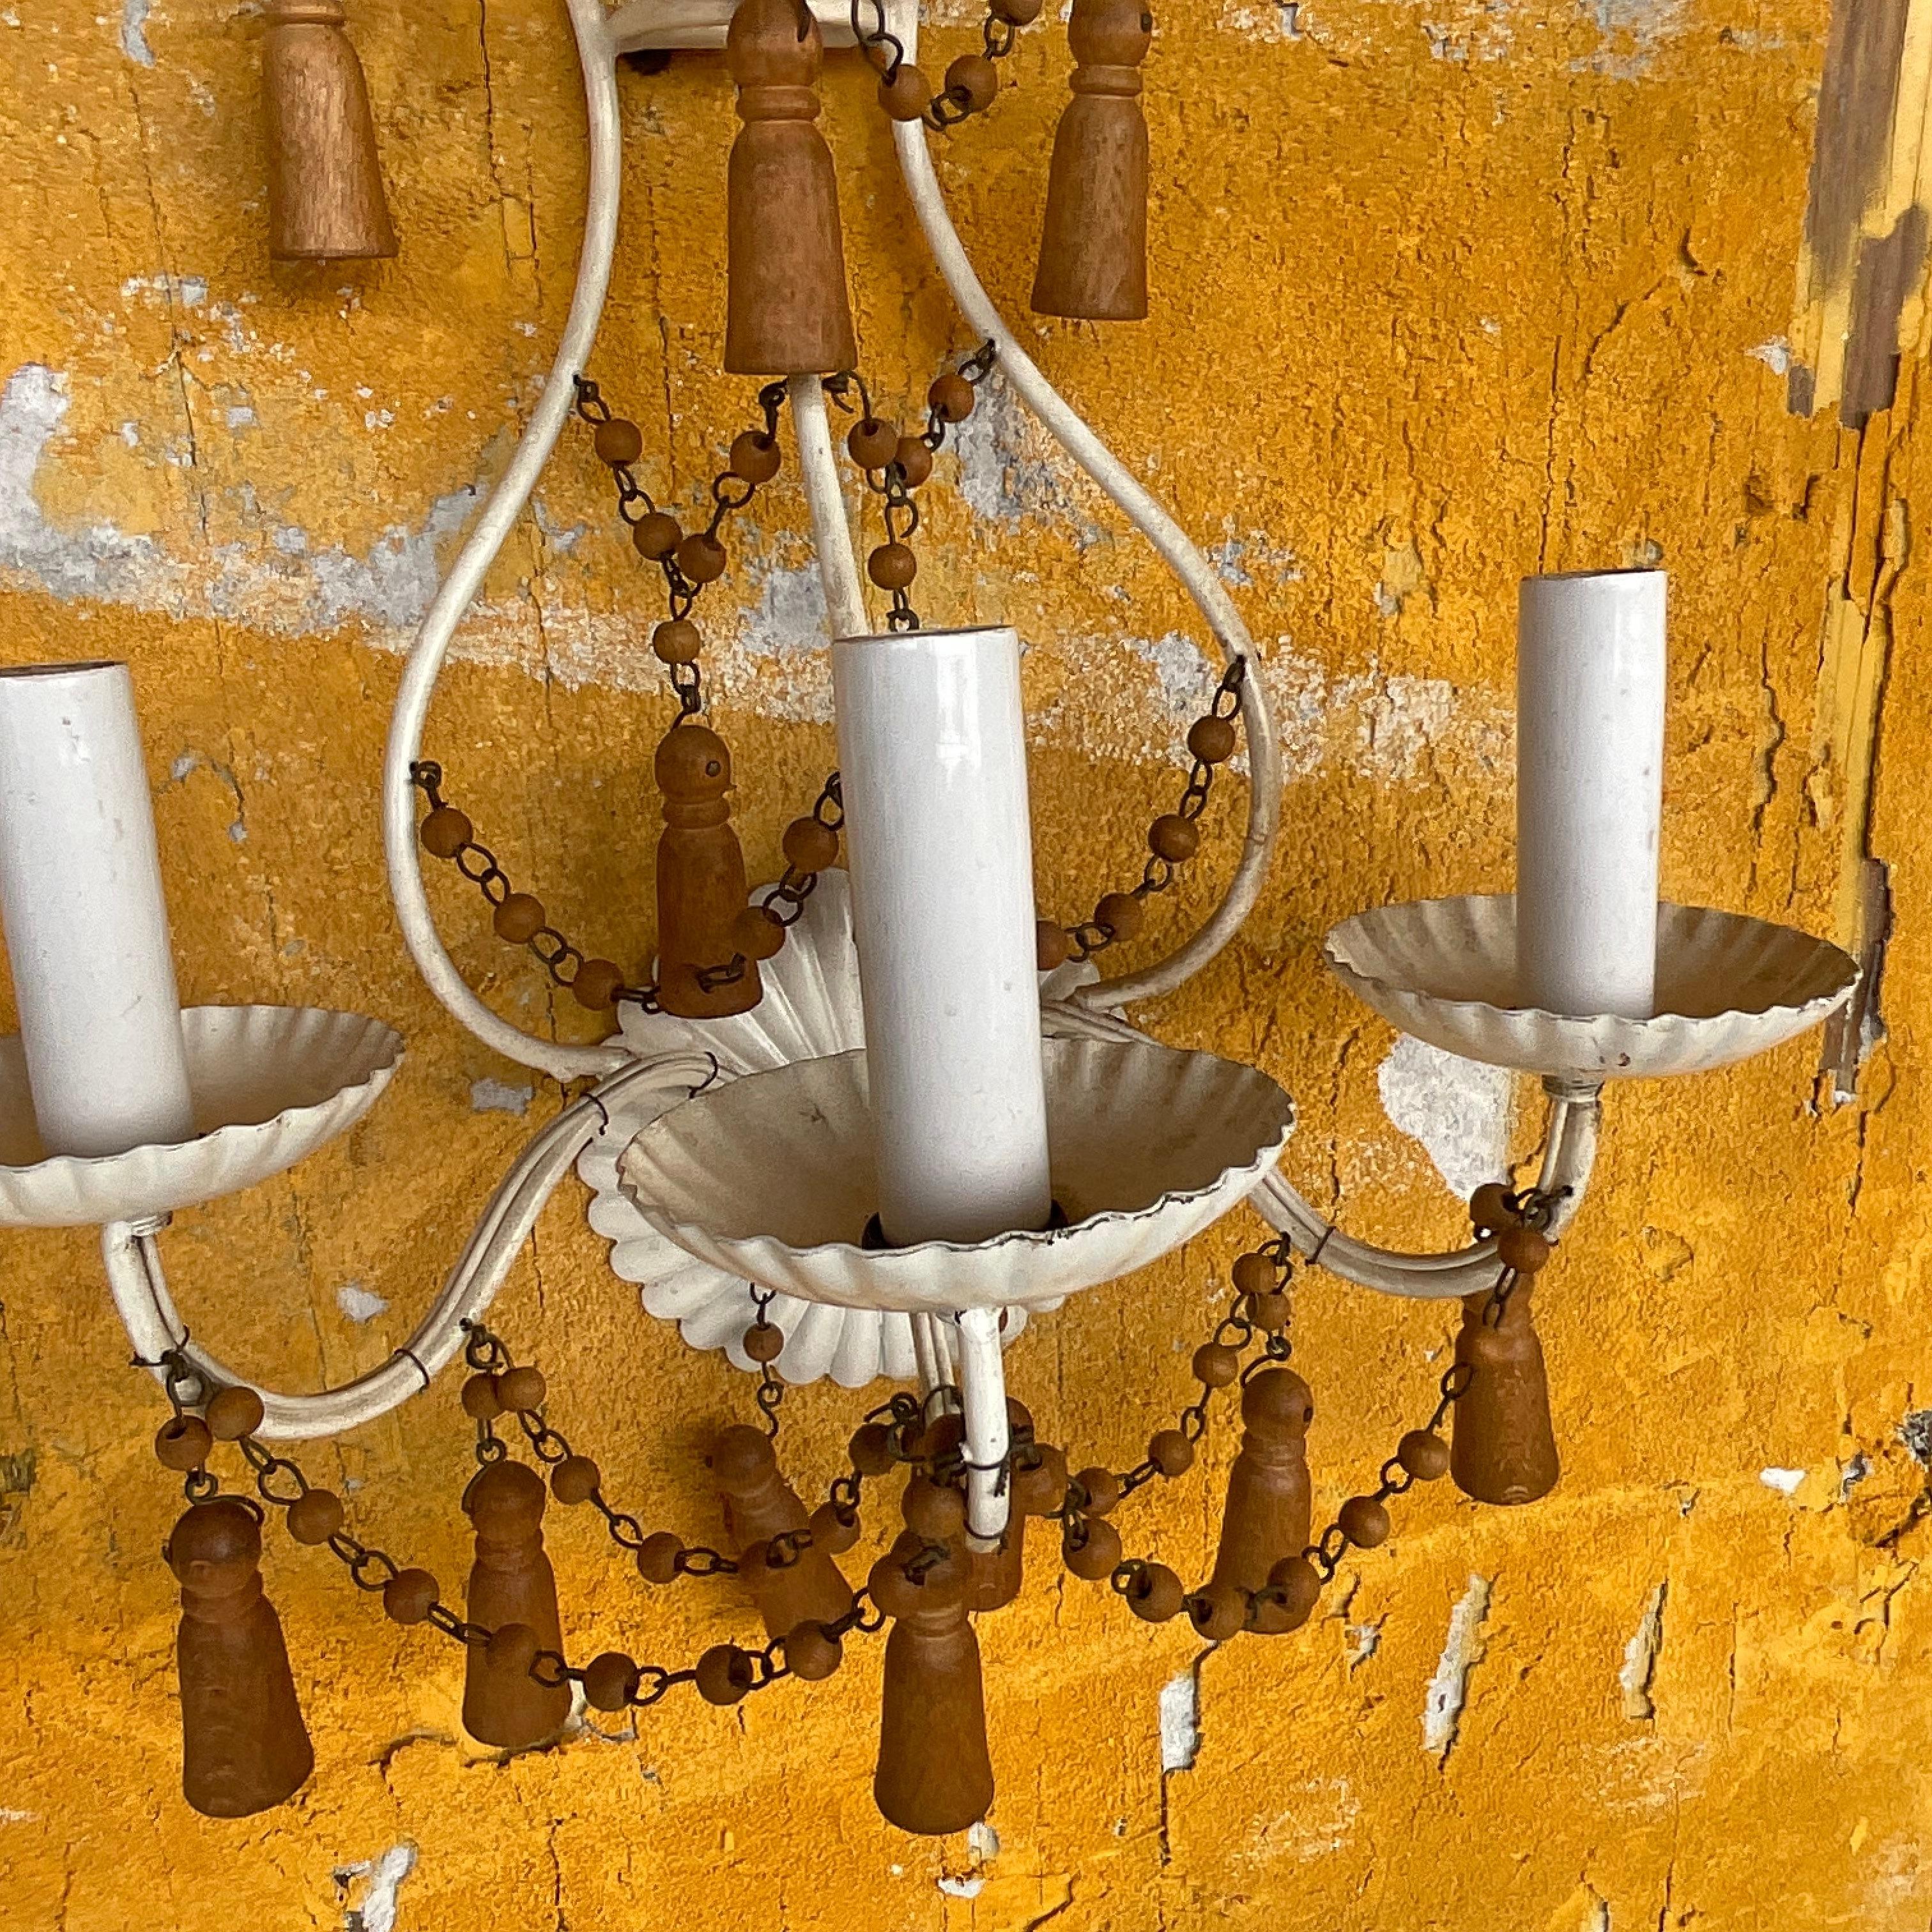 Illuminate your space with the rustic elegance of our Vintage Boho Wooden Swag Light Sconces - A Pair. Inspired by the natural beauty of American landscapes, these handcrafted sconces exude timeless charm and Bohemian allure. Enhance any room with